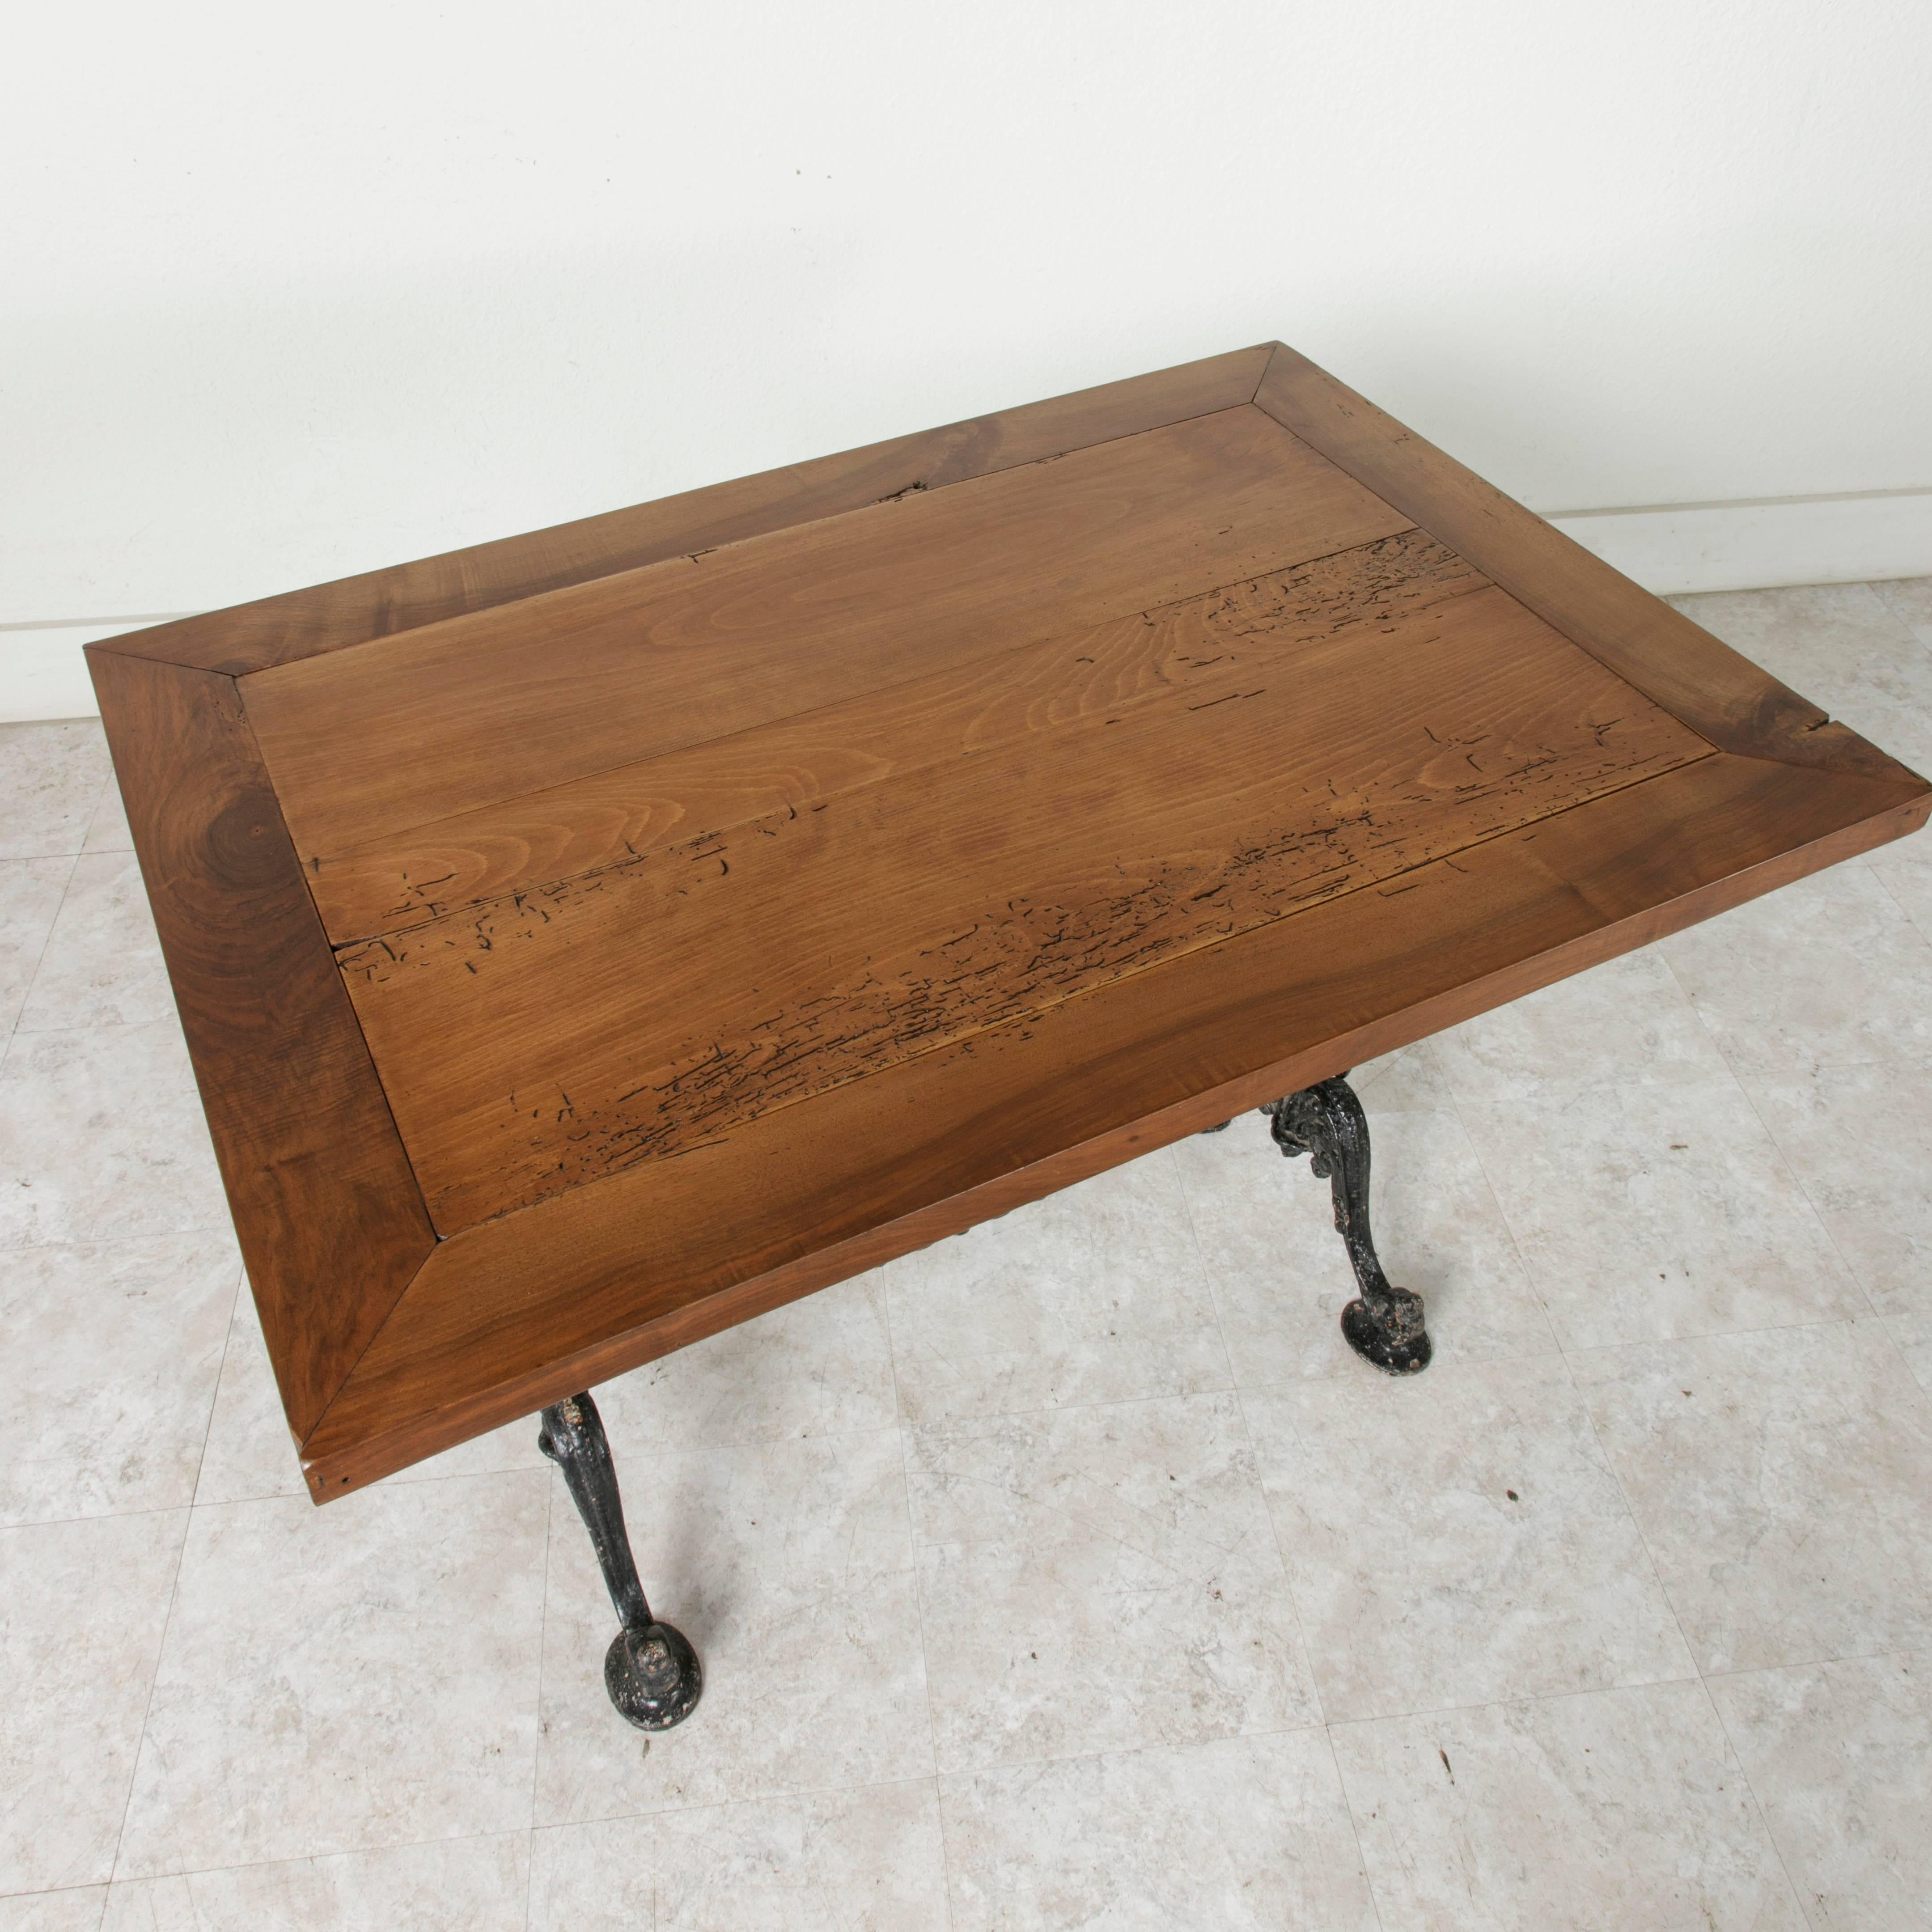 An ideal piece for a breakfast nook or small kitchen, this charming French bistro table displays the mastery of late 19th century cast iron work. A beautifully aged walnut top full of character is supported by an intricate cast iron base with four